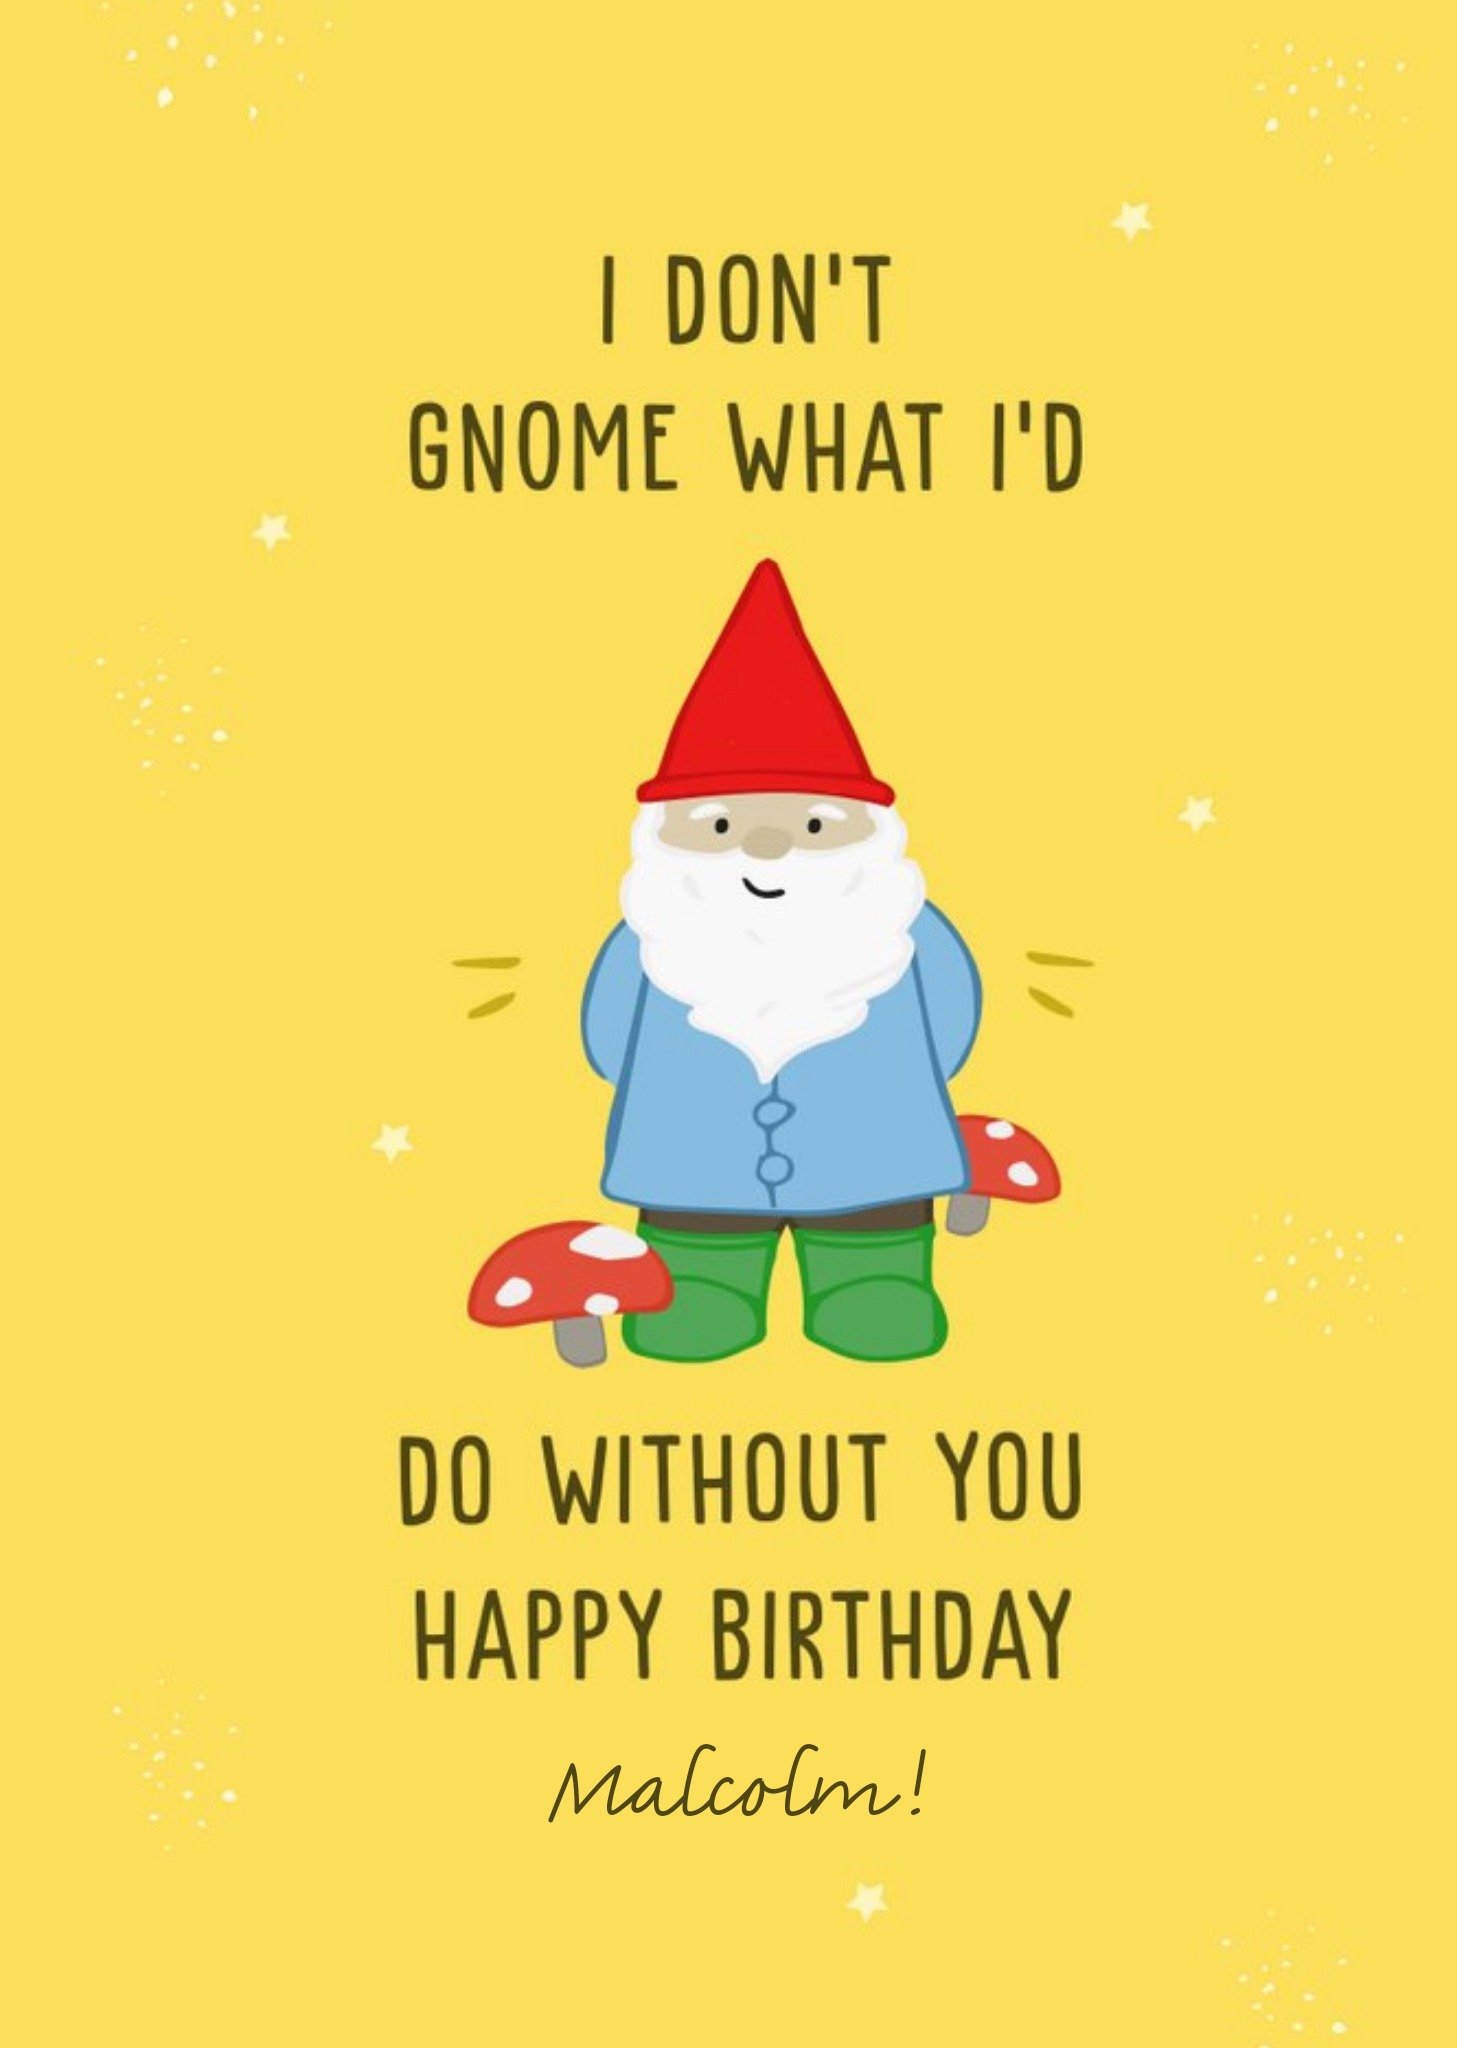 Moonpig I Don't Gnome What I'd Do Without You Illustrated Birthday Card Ecard